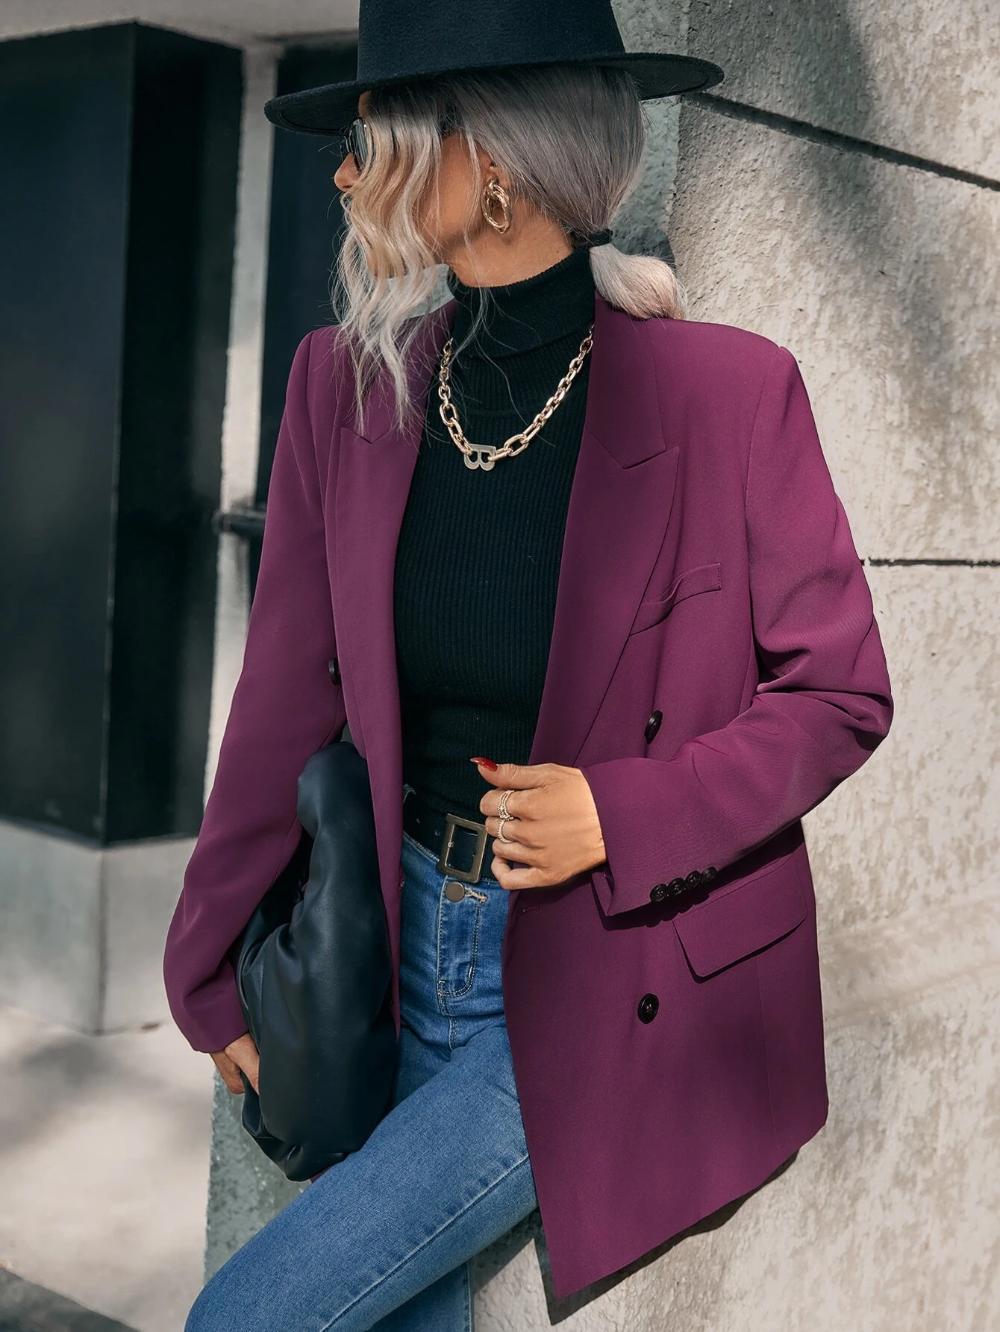 Elegant Sophistication: Stand Out in Maroon Blazers